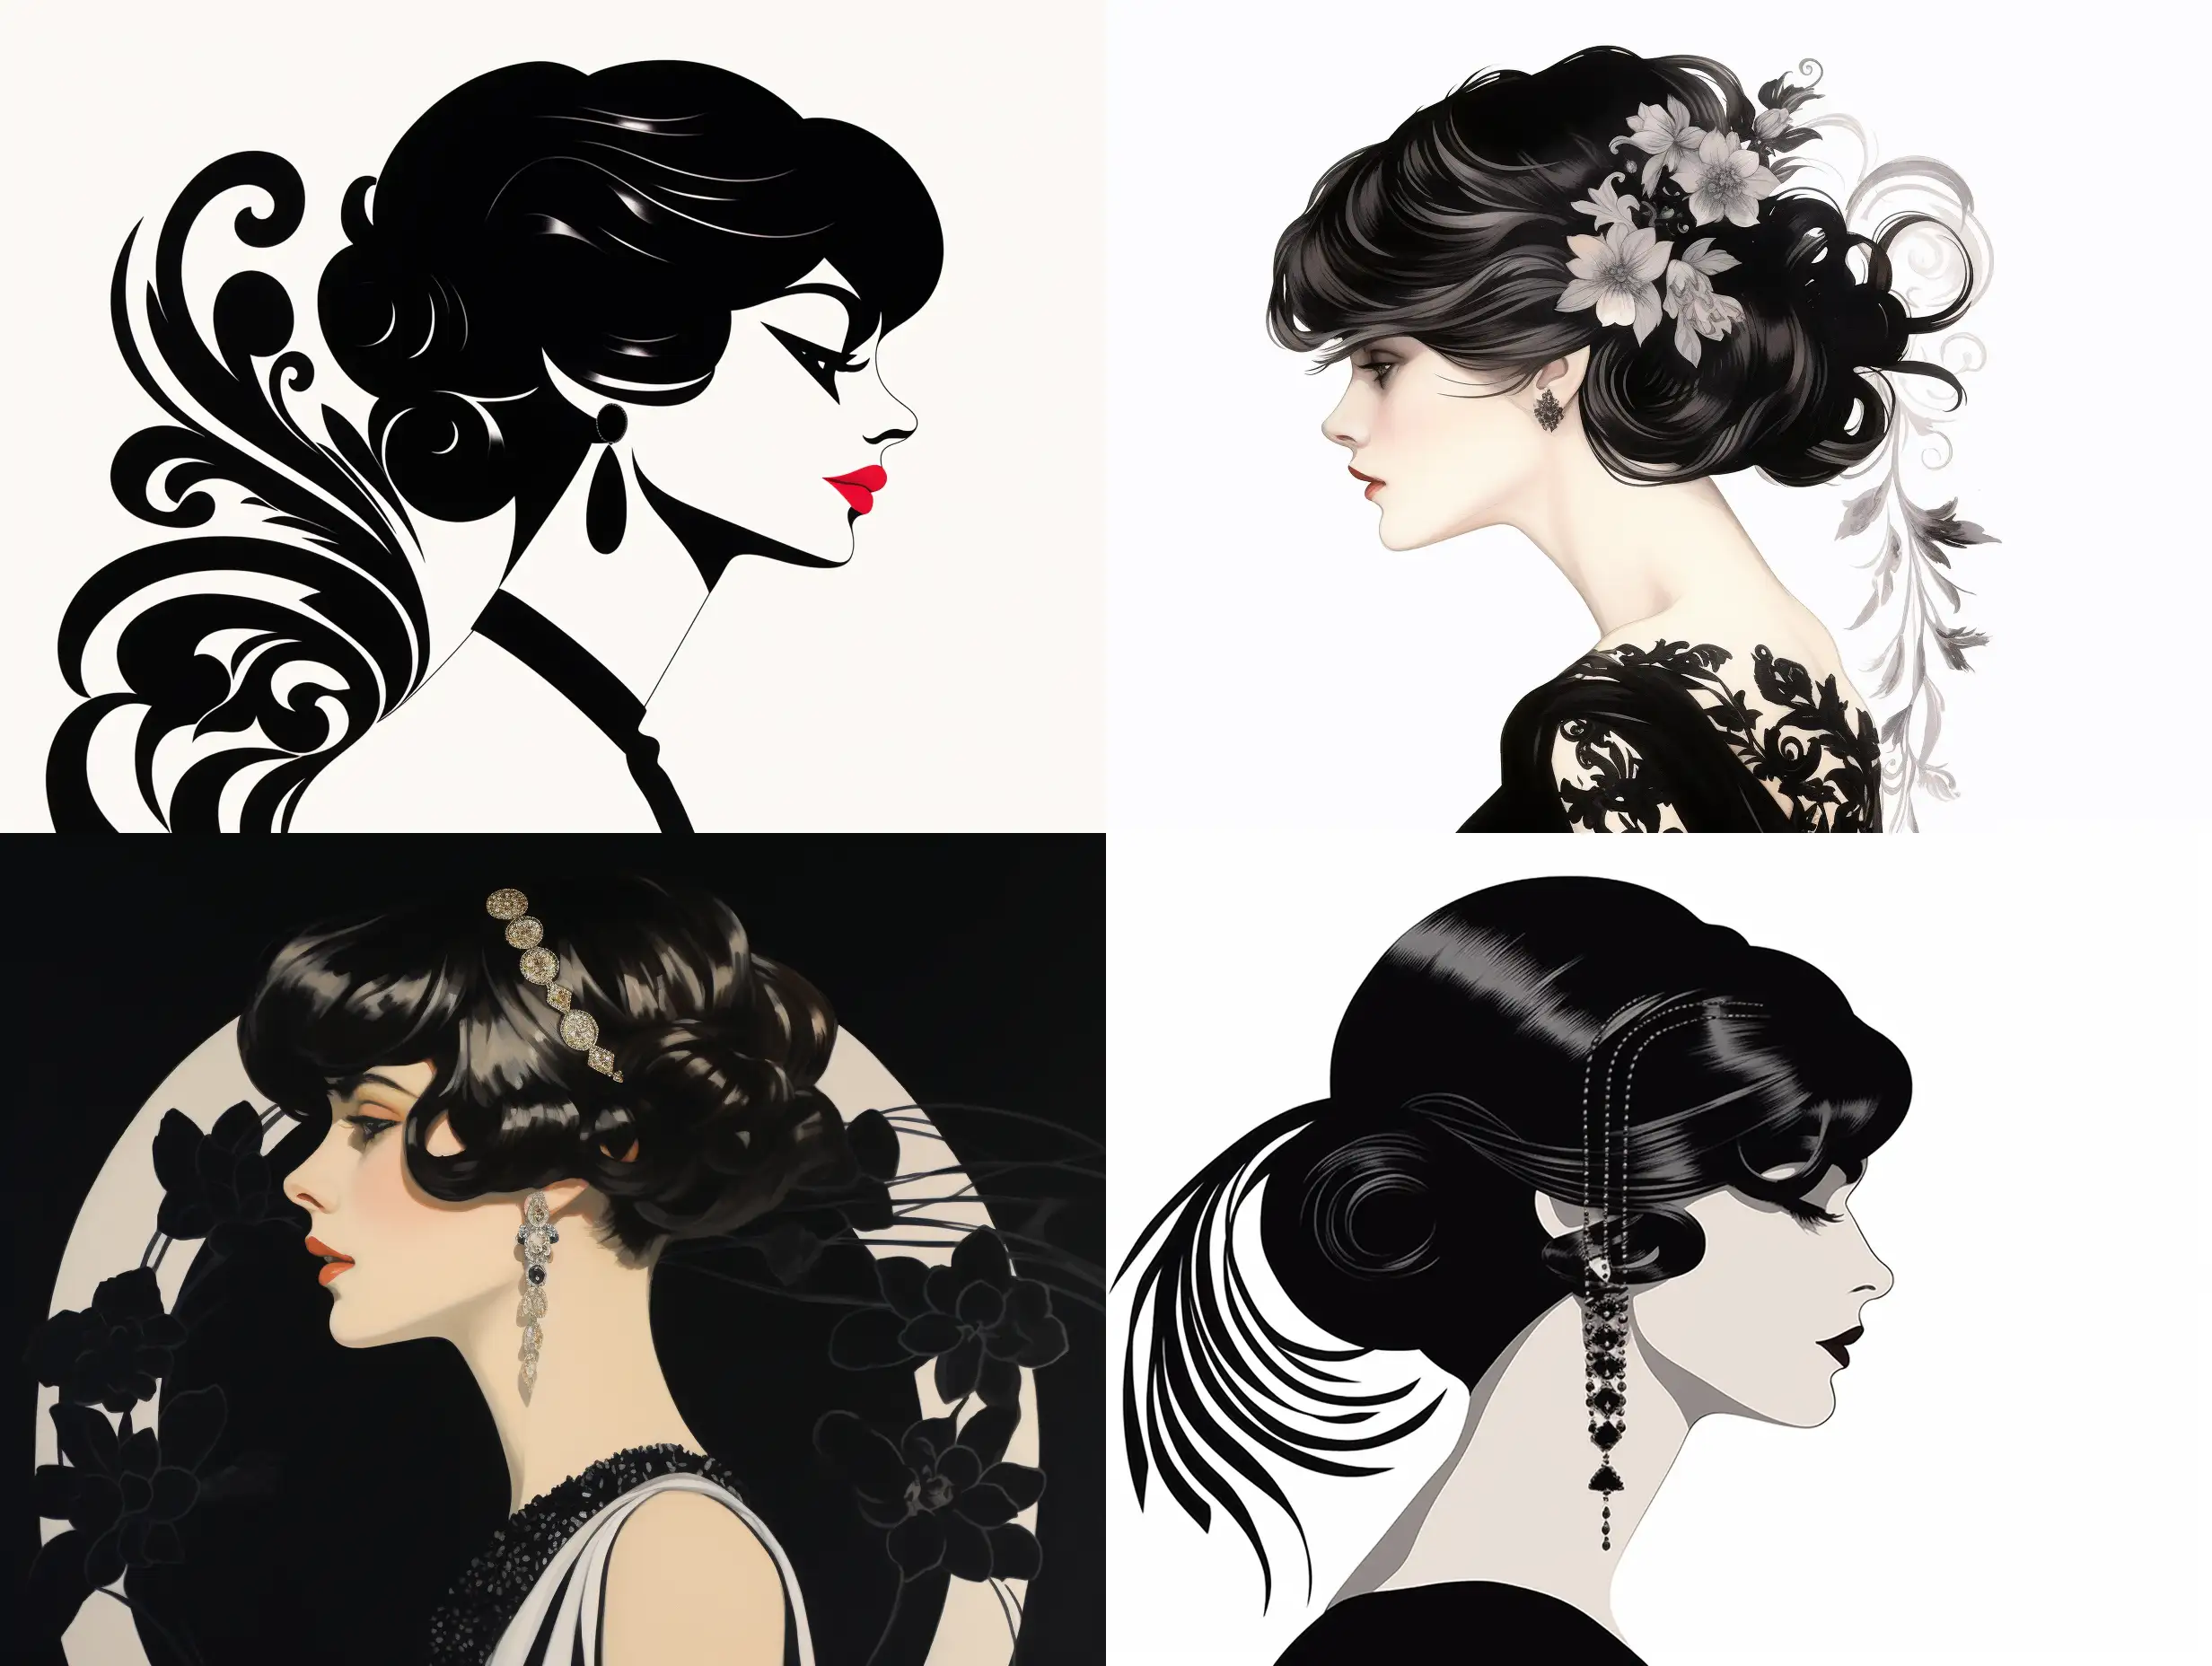 Waist-high portrait of Coco Chanel in profile, middle-aged, in a black dress, with Chanel accessories, with a small crown on her head, many details, against the background of the Chanel logo pattern, white color on the edge, fashion illustration style